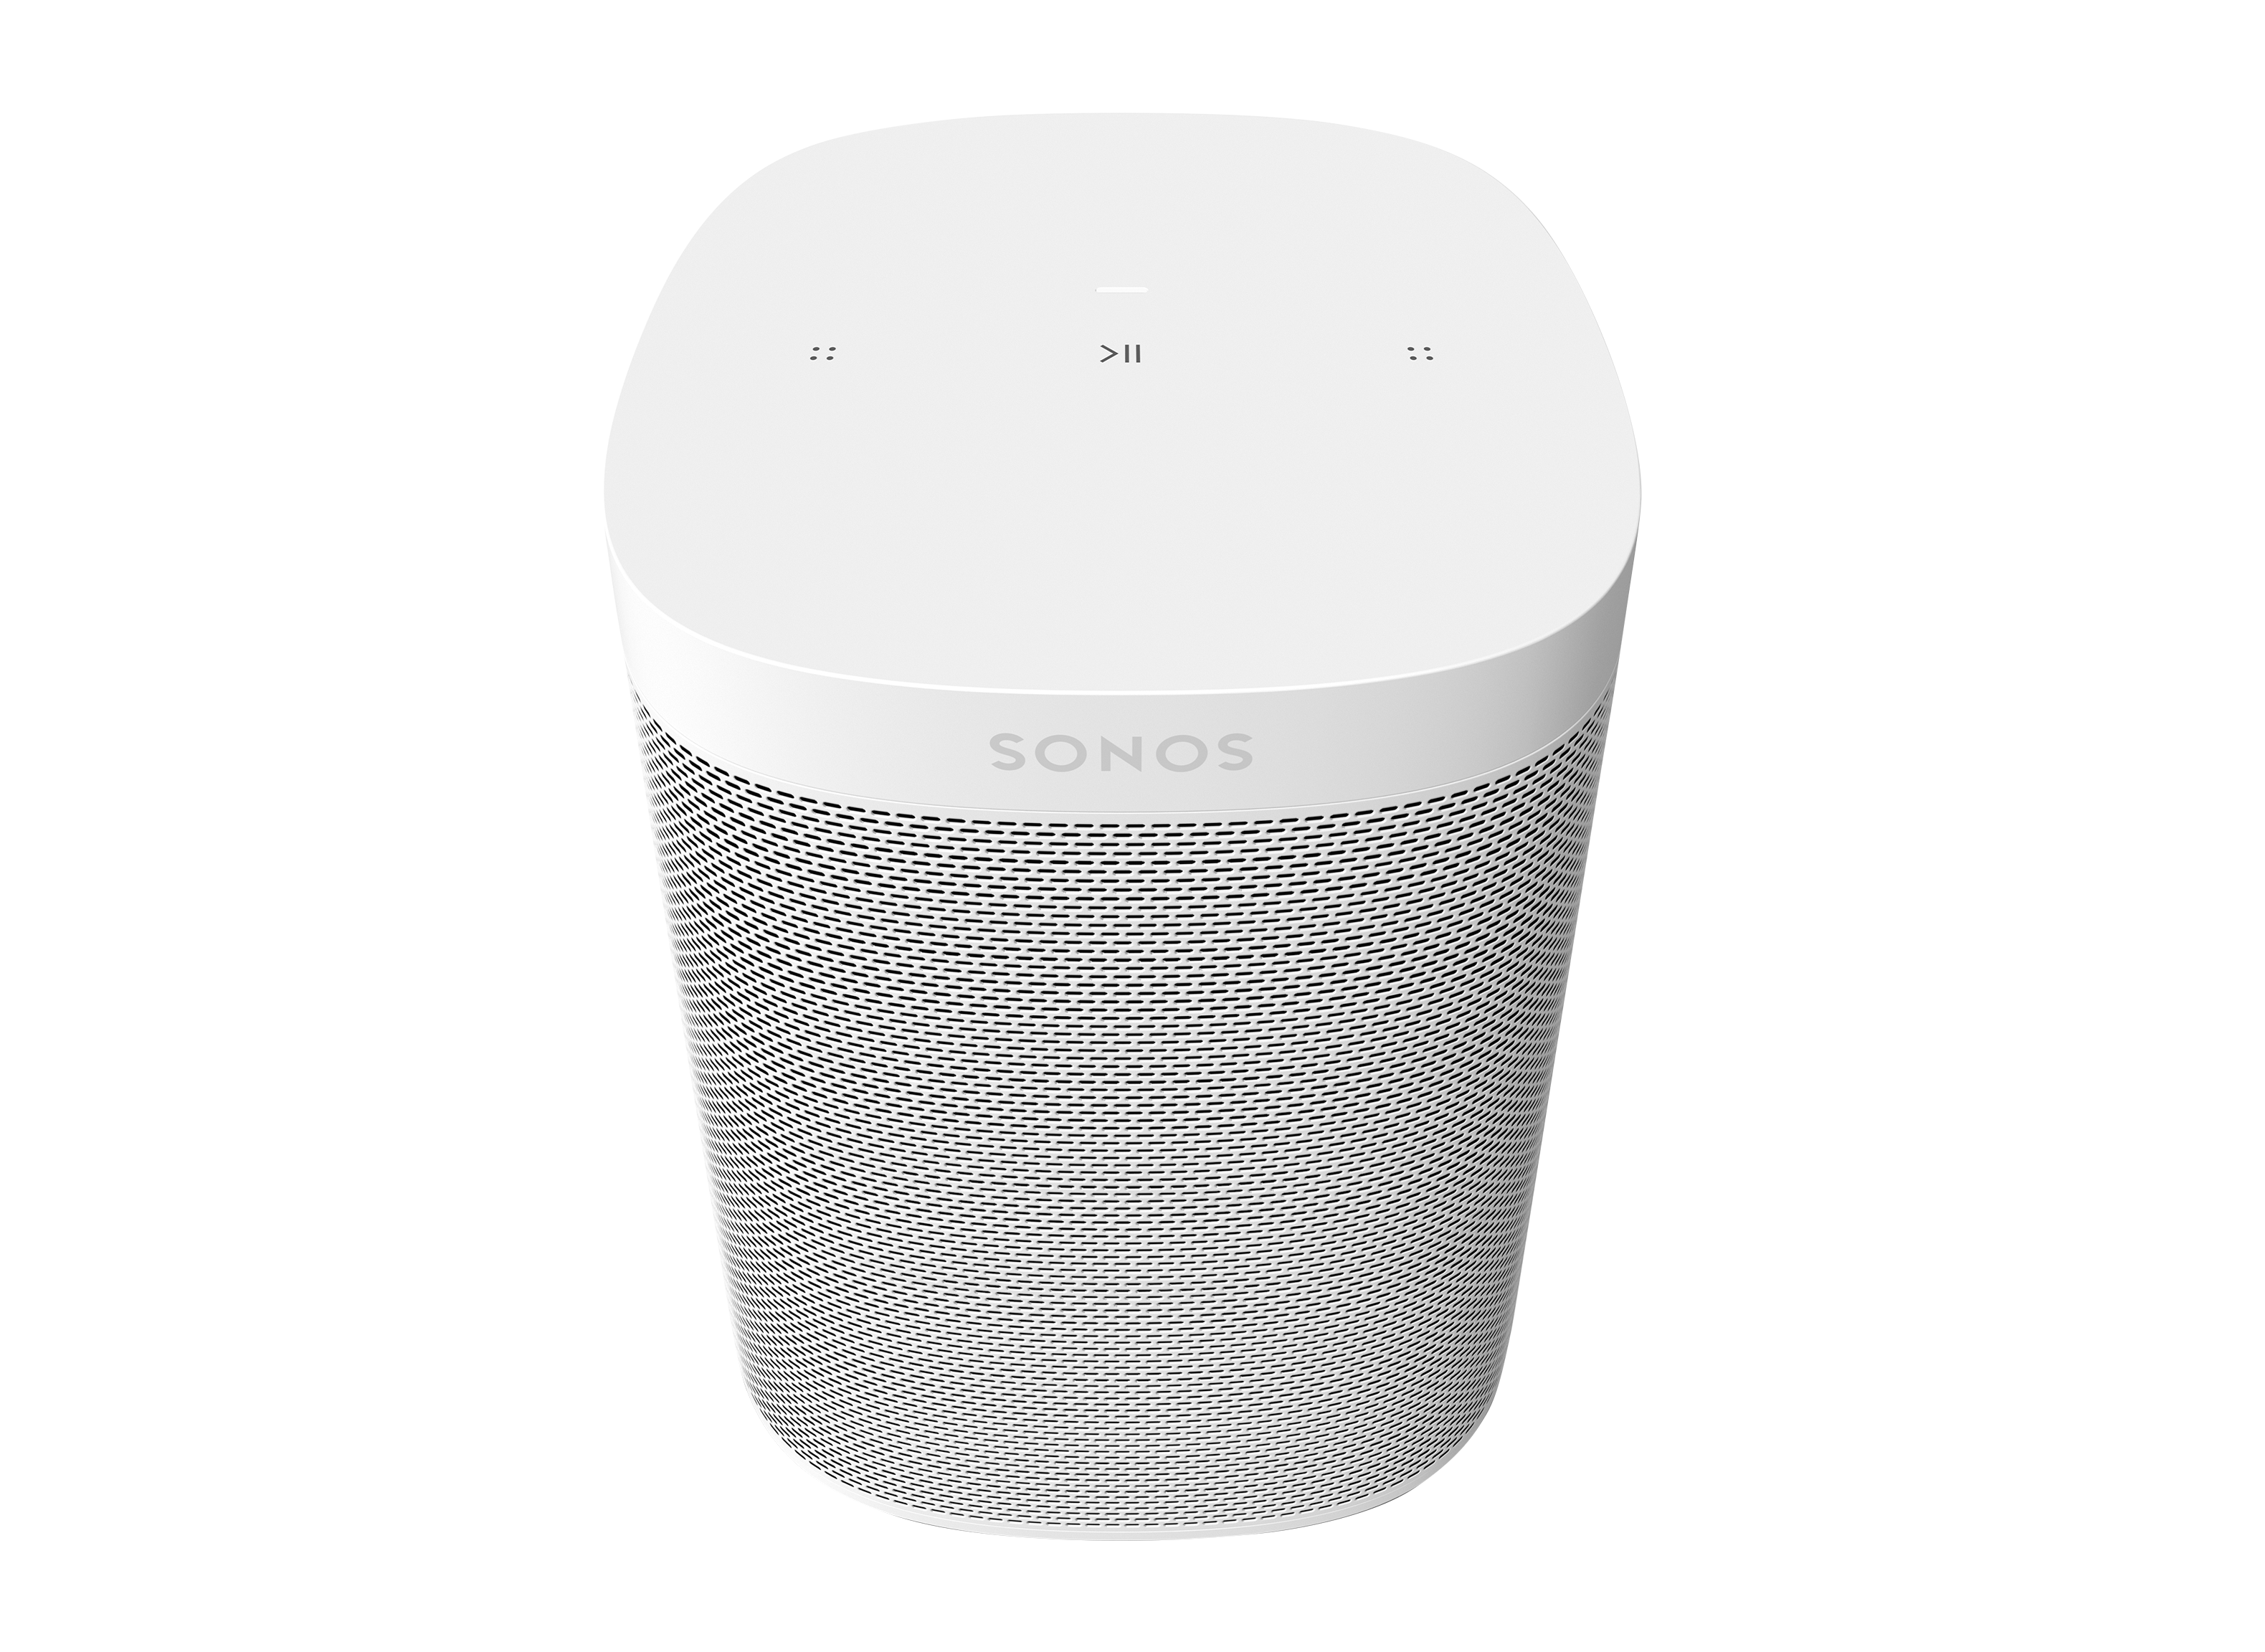 burst Caius komme Sonos One SL Wireless & Bluetooth Speaker Review - Consumer Reports